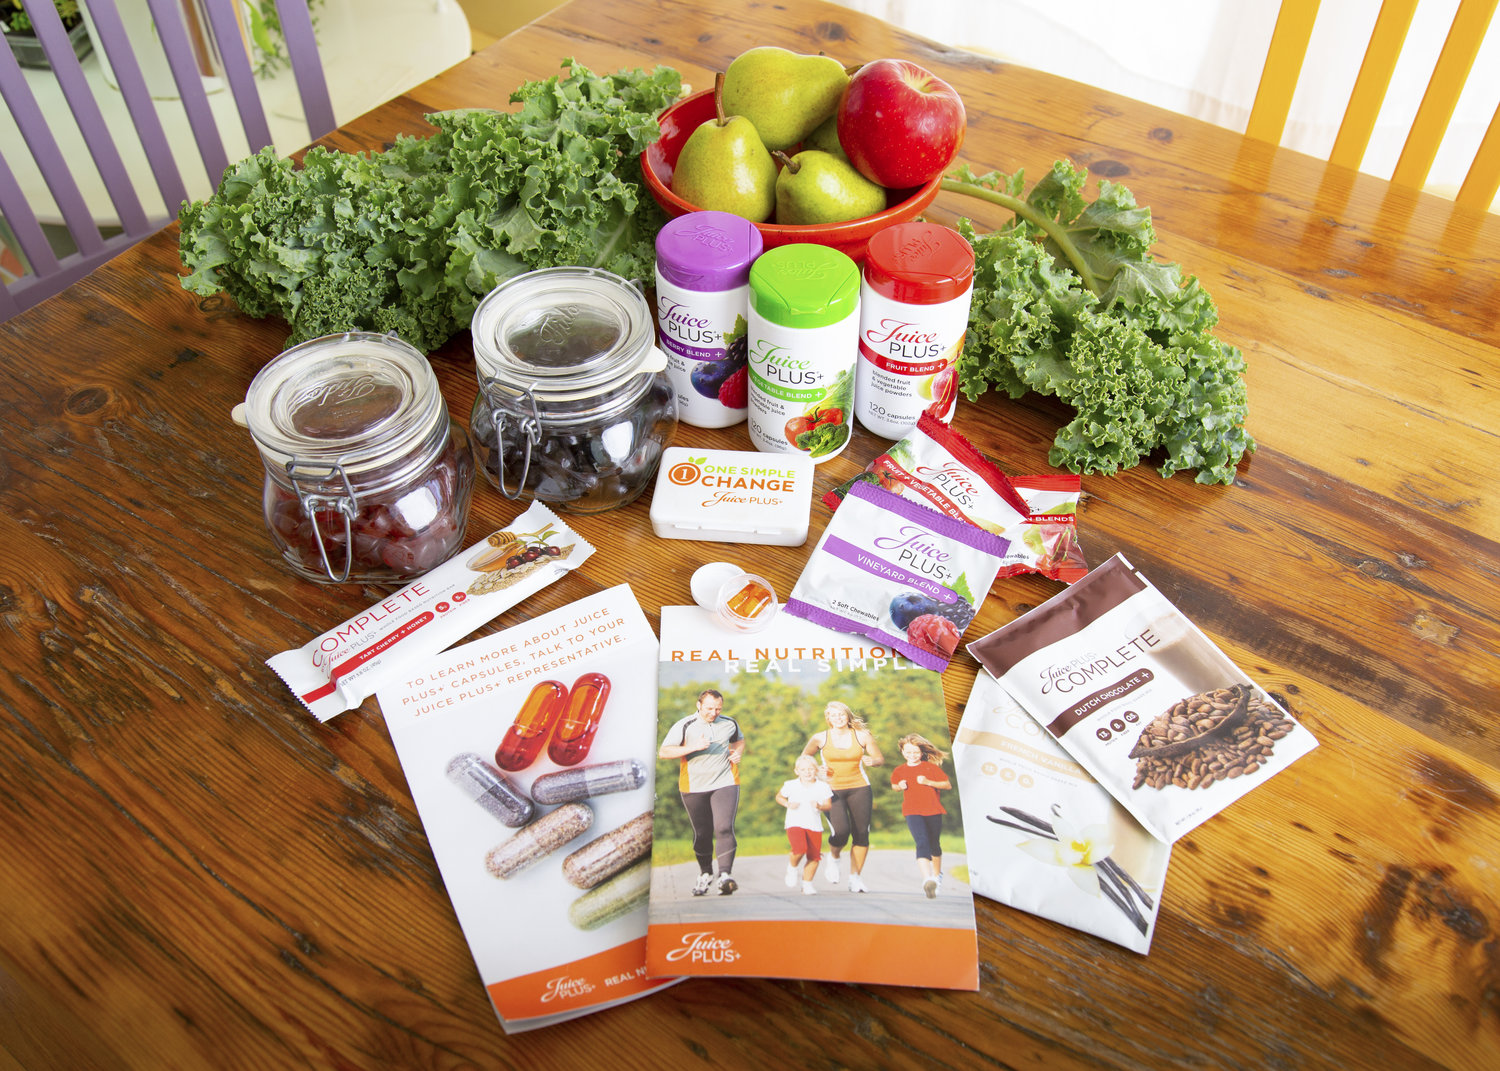 What Is Comparable To Juice Plus? 